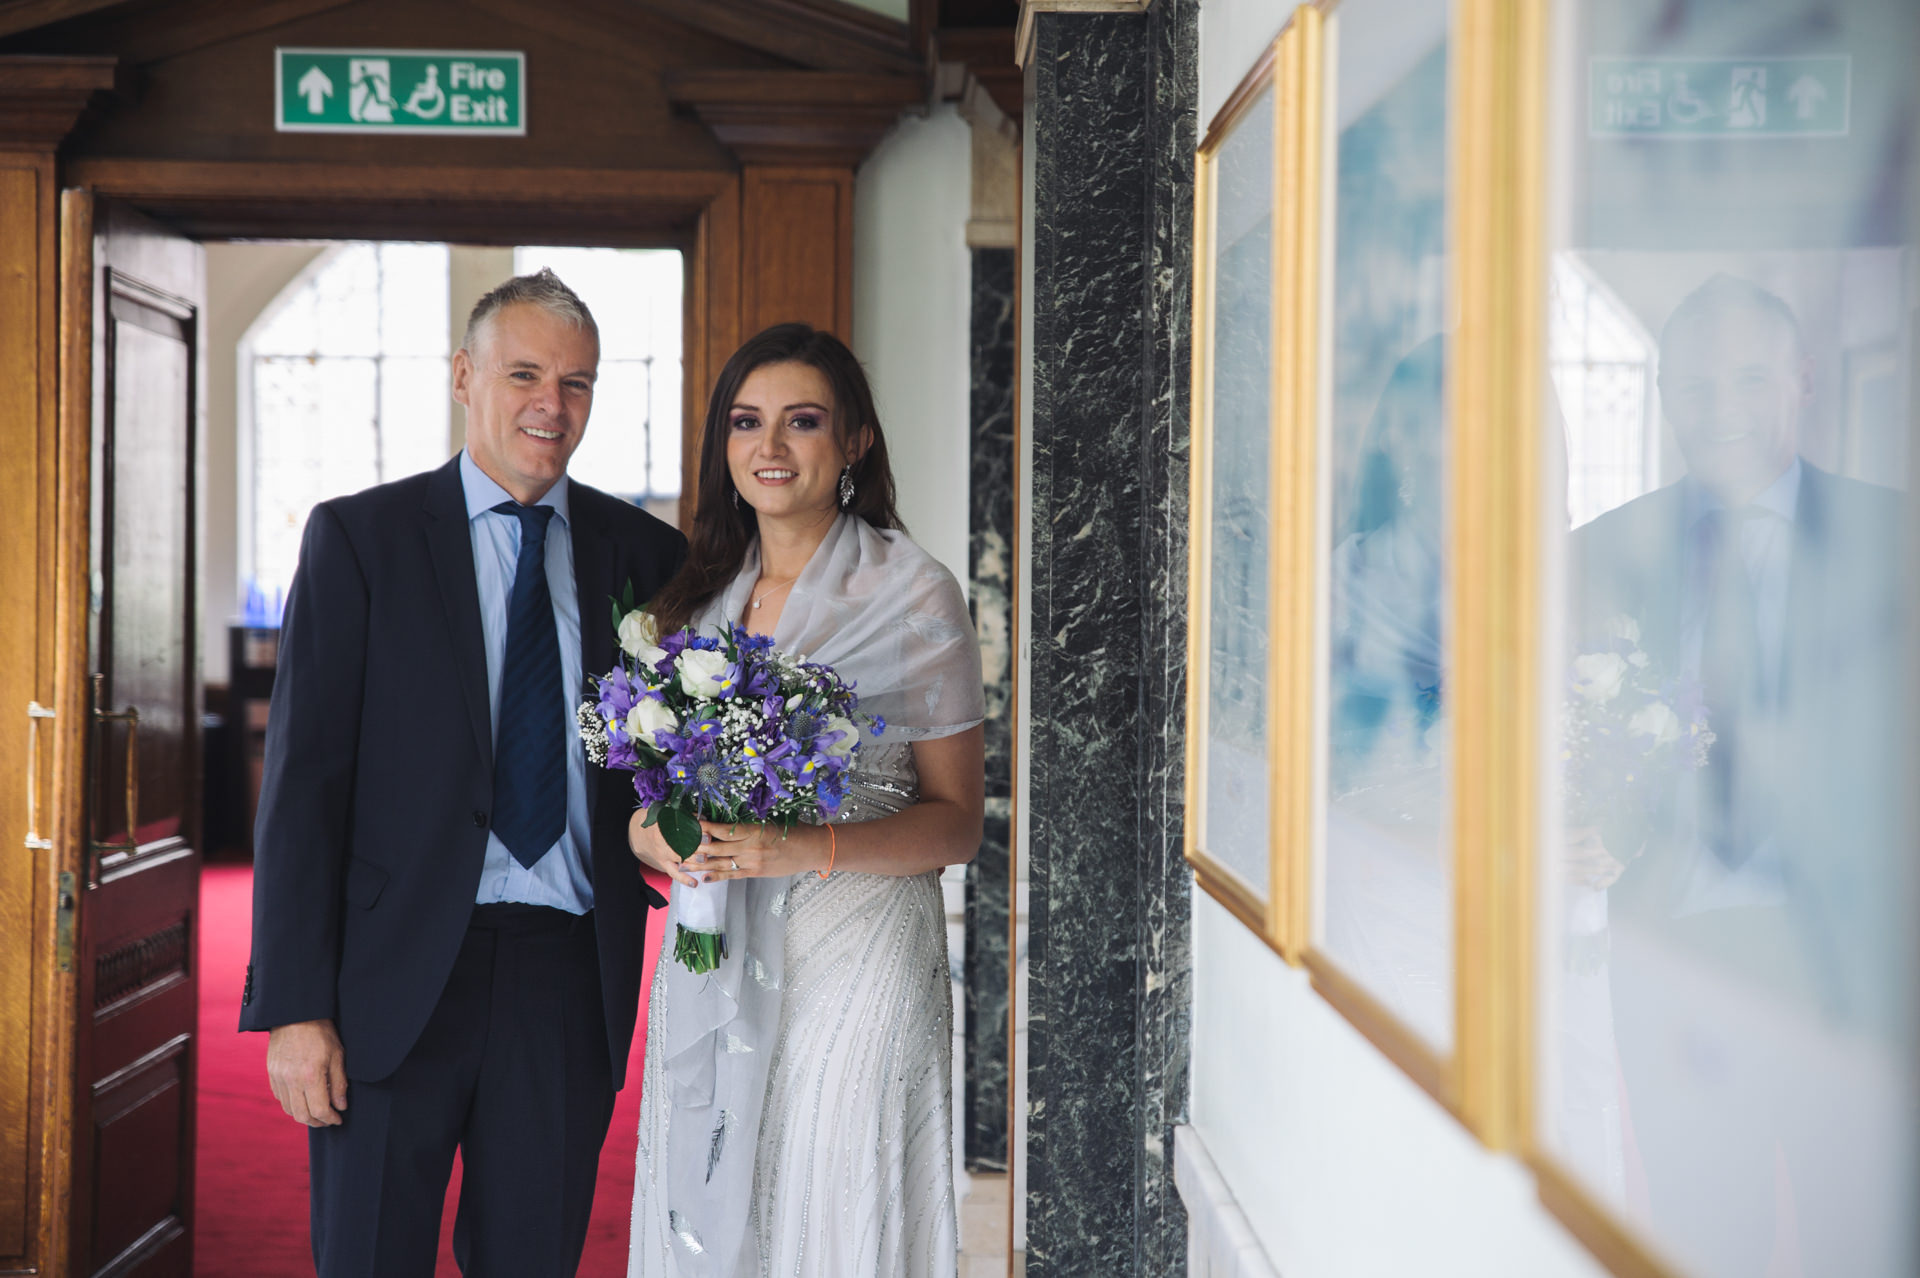 islington town hall wedding bride and her father